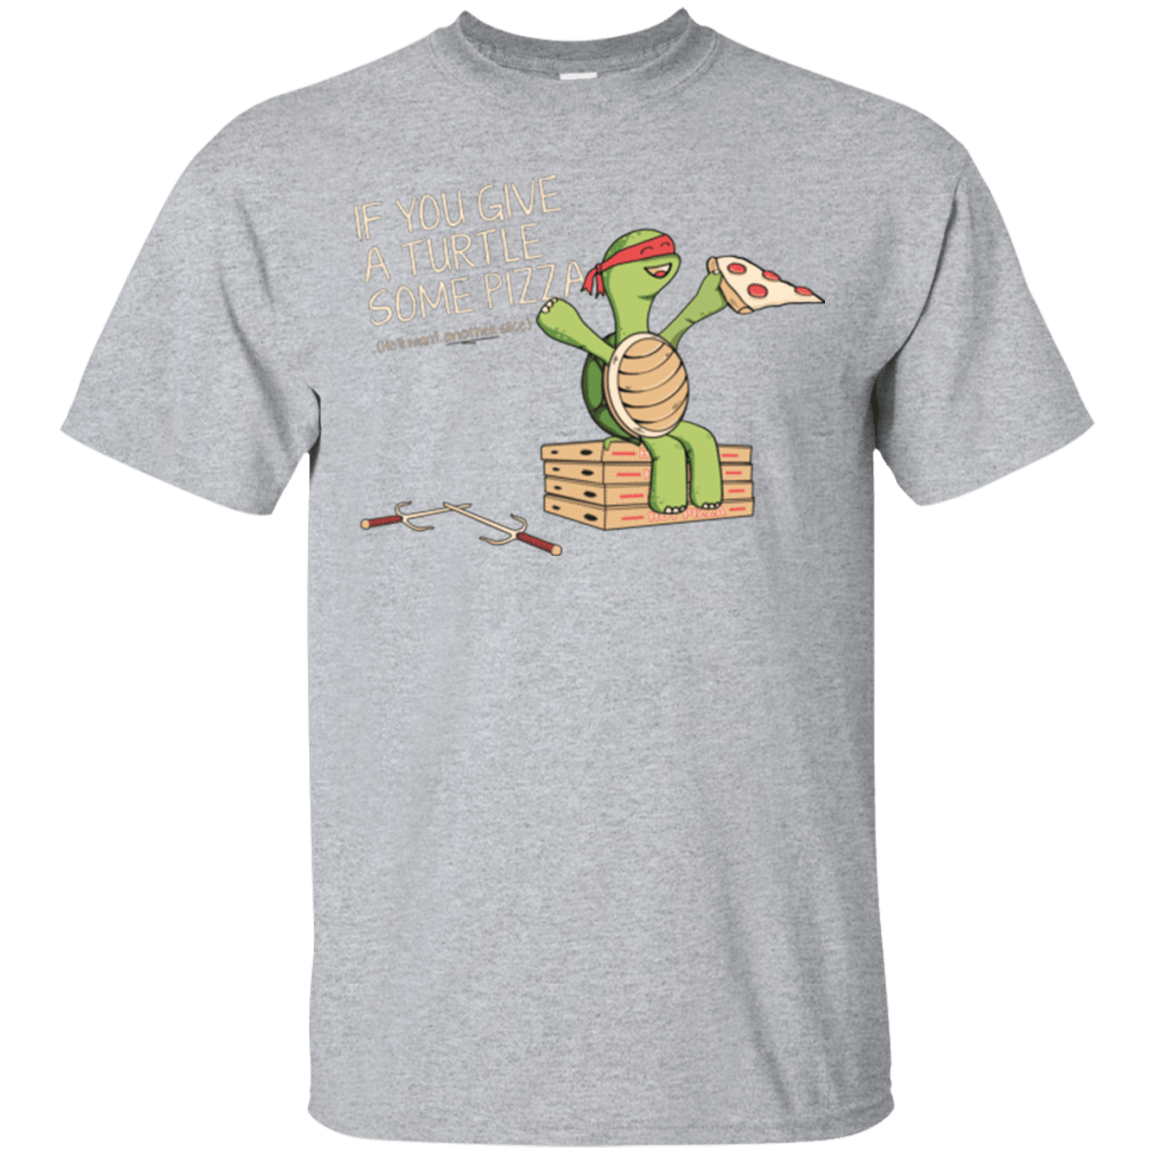 T-Shirts Sport Grey / Small Give a Turtle T-Shirt